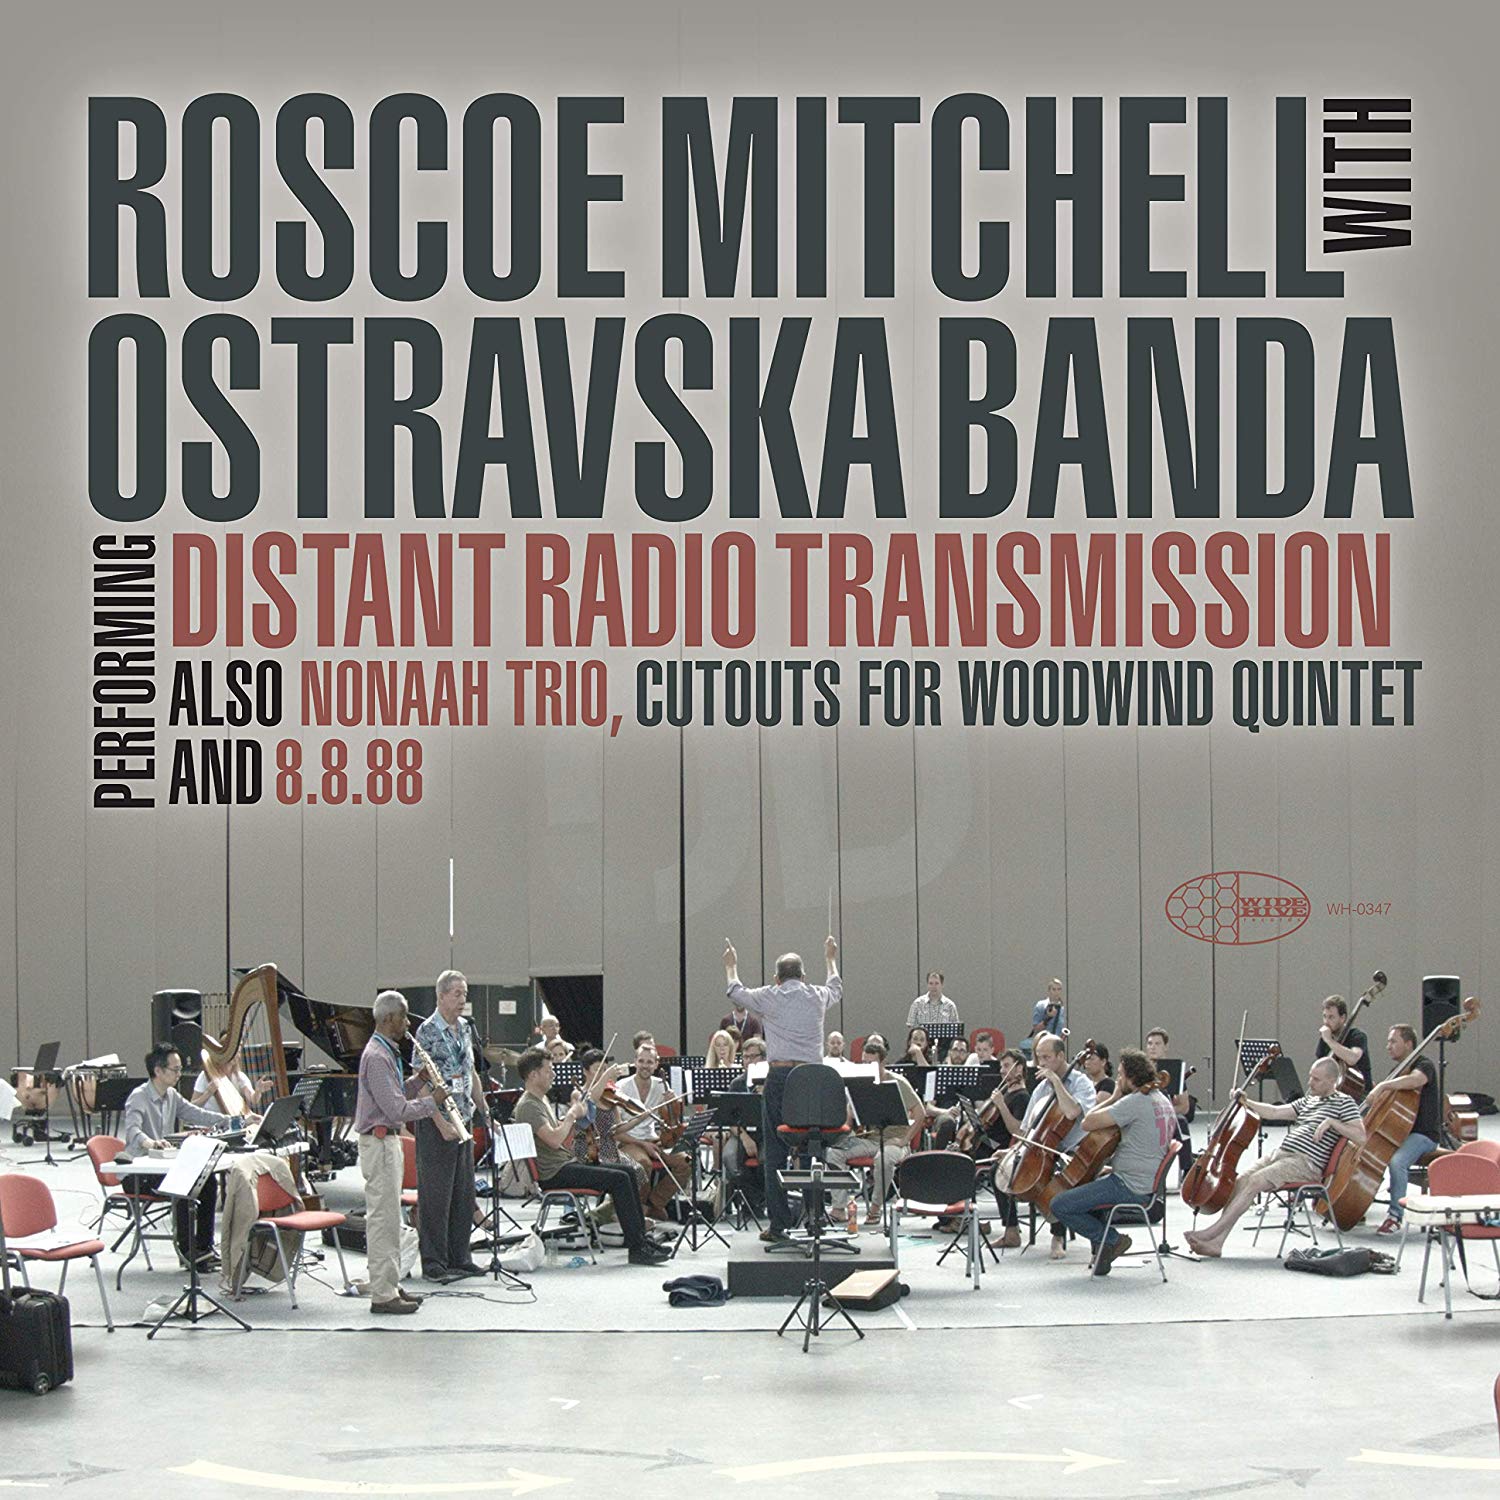 ROSCOE MITCHELL - Roscoe Mitchell With Ostravska Banda Performing Distant Radio Transmission Also Nonaah Trio, Cutouts For Woodwind Quintet, And 8.8.88 cover 